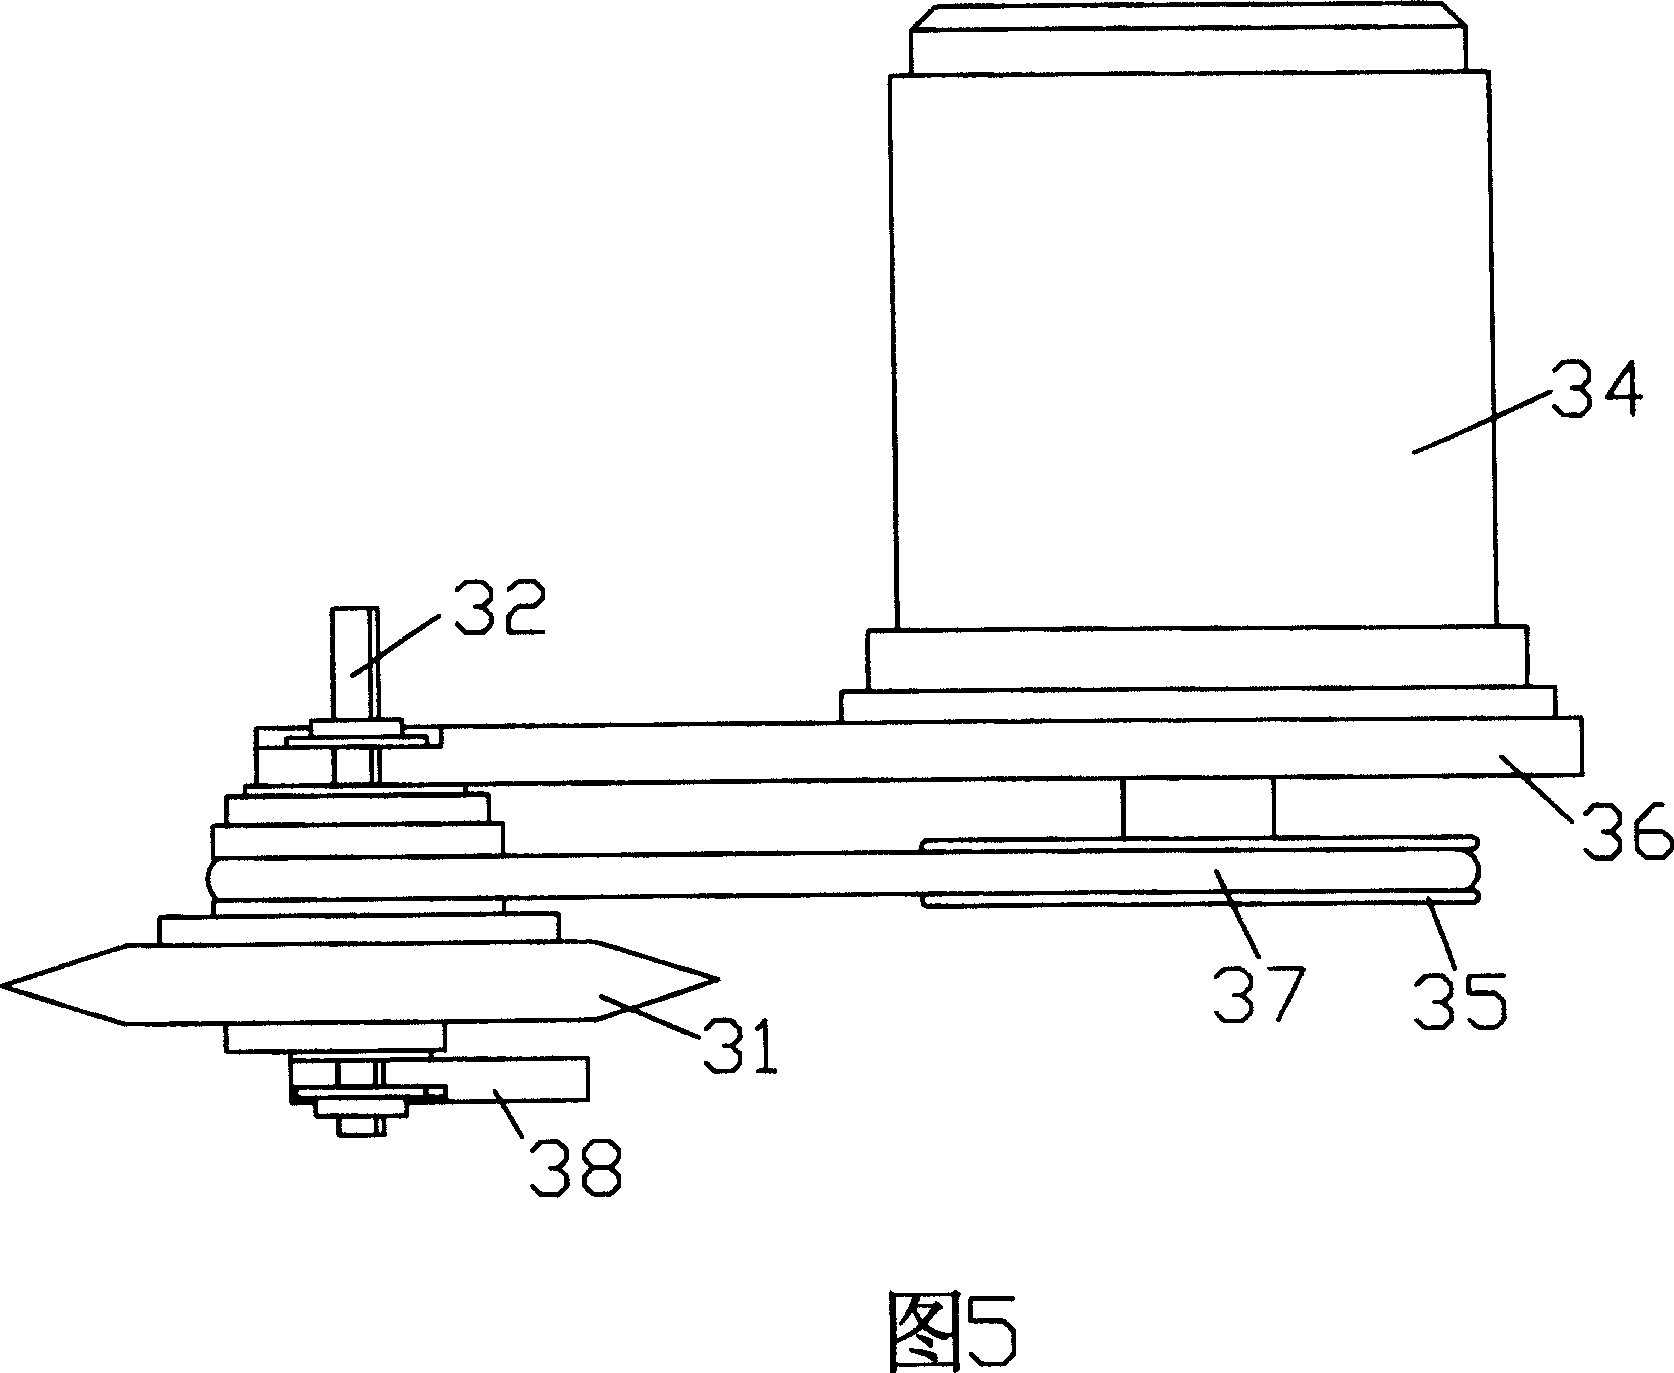 High frequency pulse laser induced electrode directional discharging apparatus for roughing roller surface